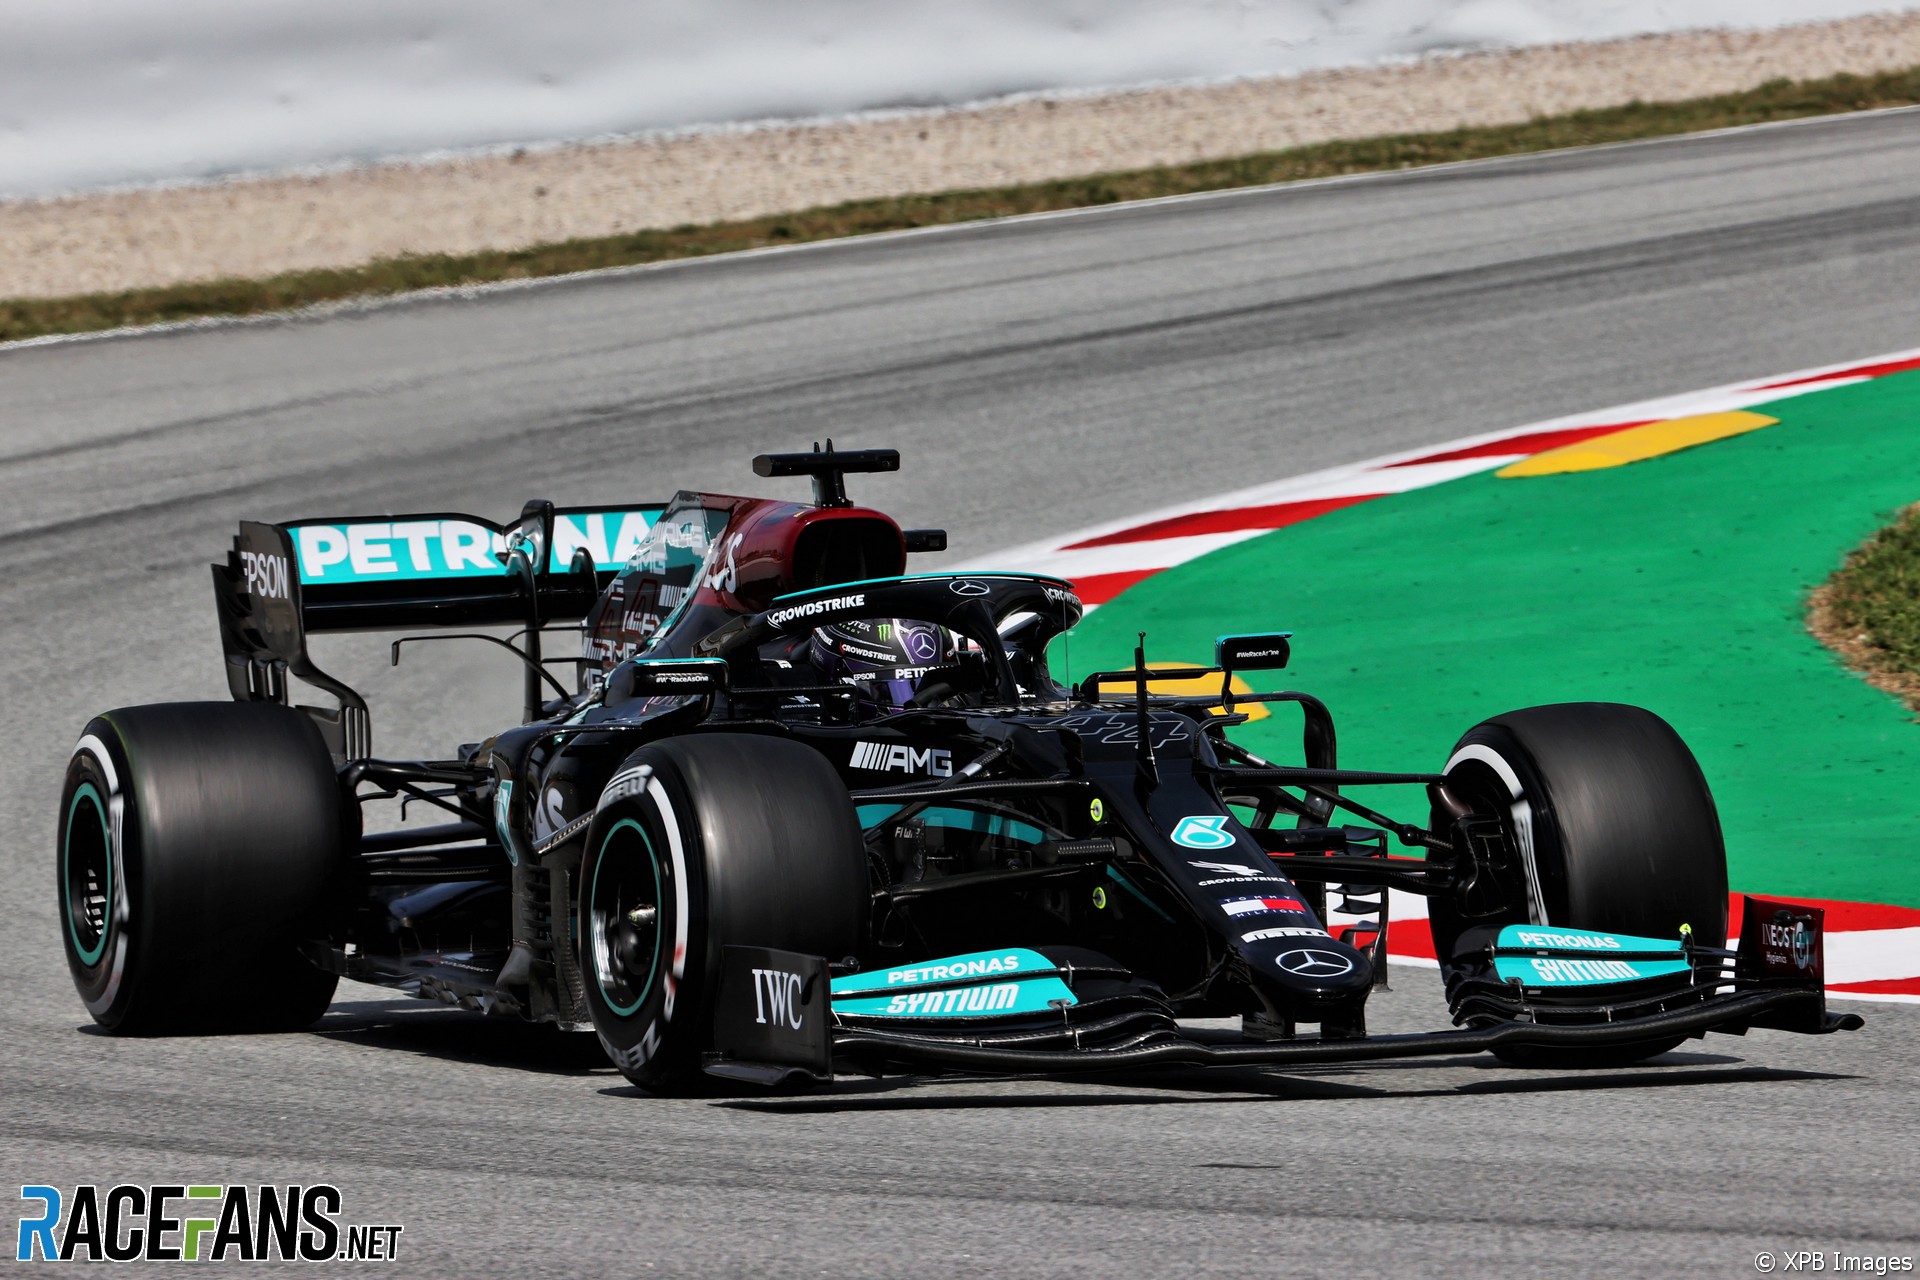 Hamilton leads Mercedes one-two, Verstappen ninth in second practice